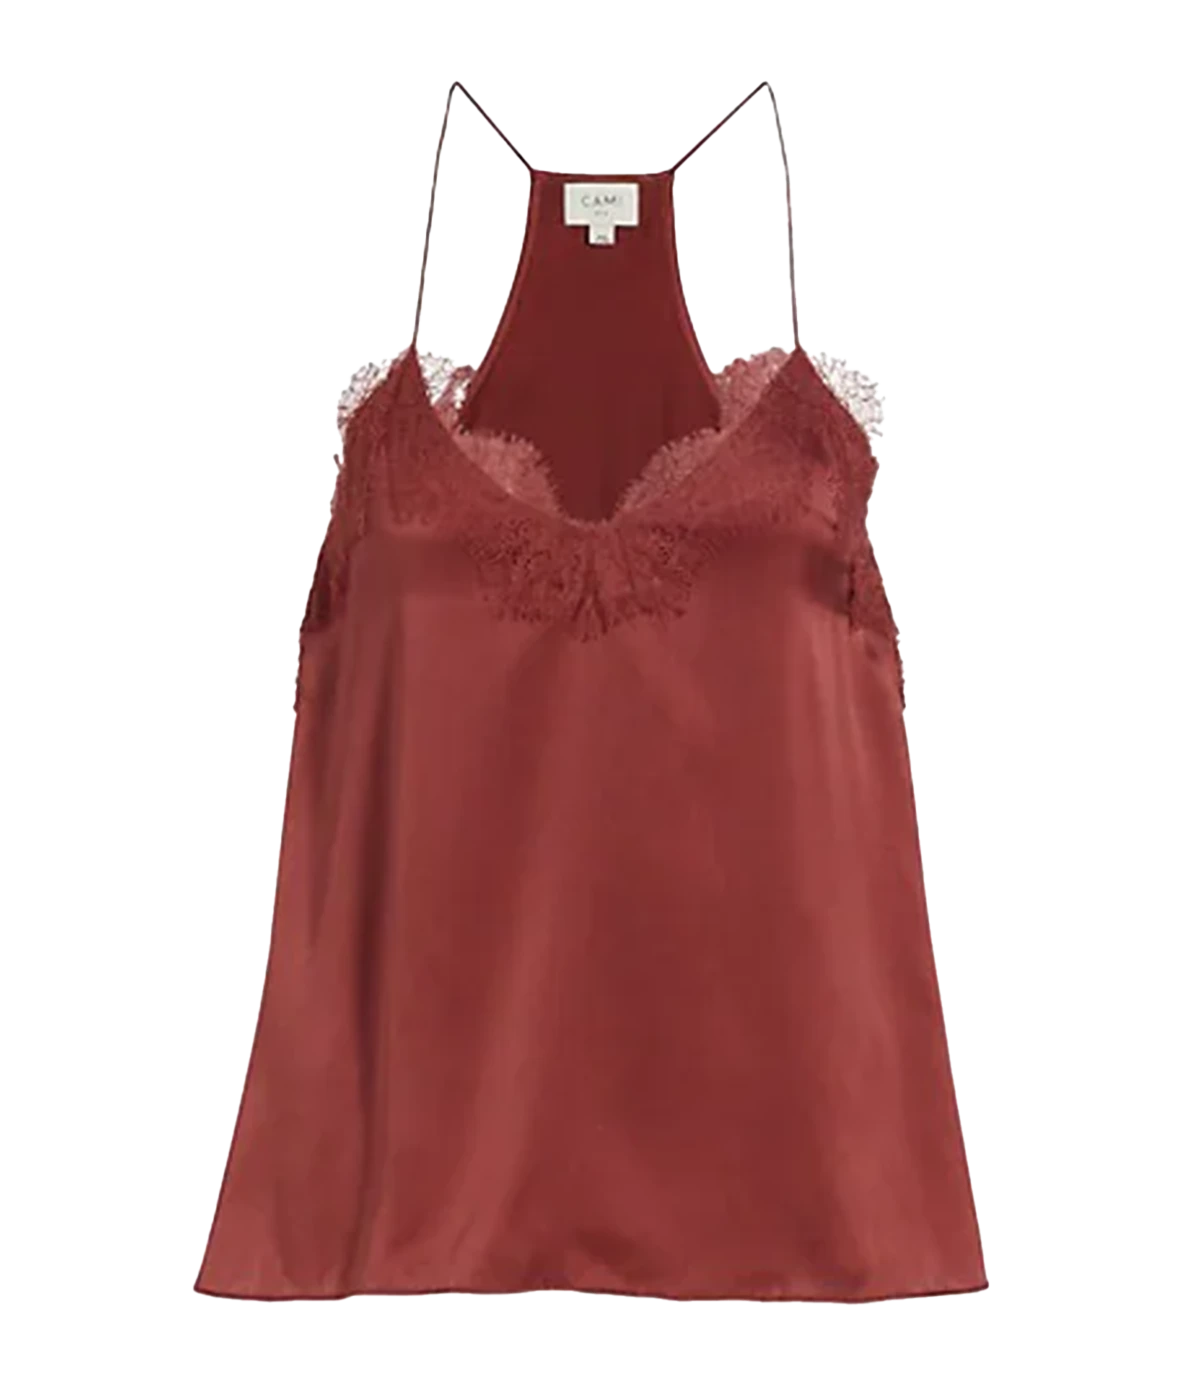 An 100% silk camisole in an burnt red orange colourway, with delicate lace trim and adjustable racer back straps. 100% silk, bra friendly, everyday elevated basic, bra friendly, V Neckline.  